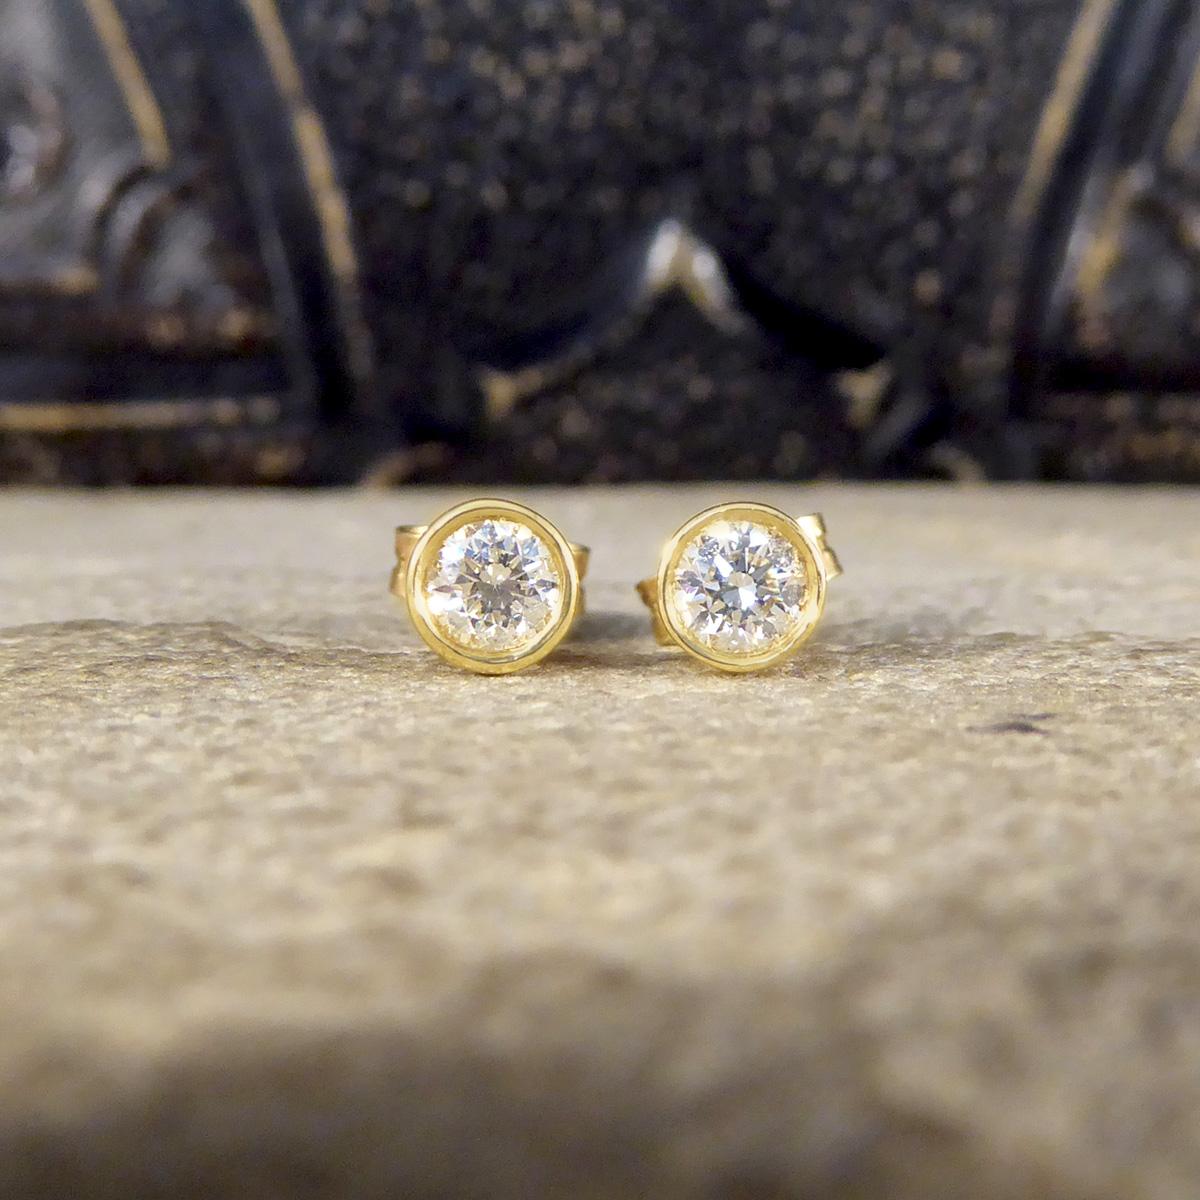 The perfect pair of Yellow Gold set stud earrings. Each stud is set with a 0.25ct Round Brilliant Cut Diamond, matching well in colour and clarity and weighing a total of 0.50ct. Each Diamond sits in a Yellow Gold basket with a rub over collar